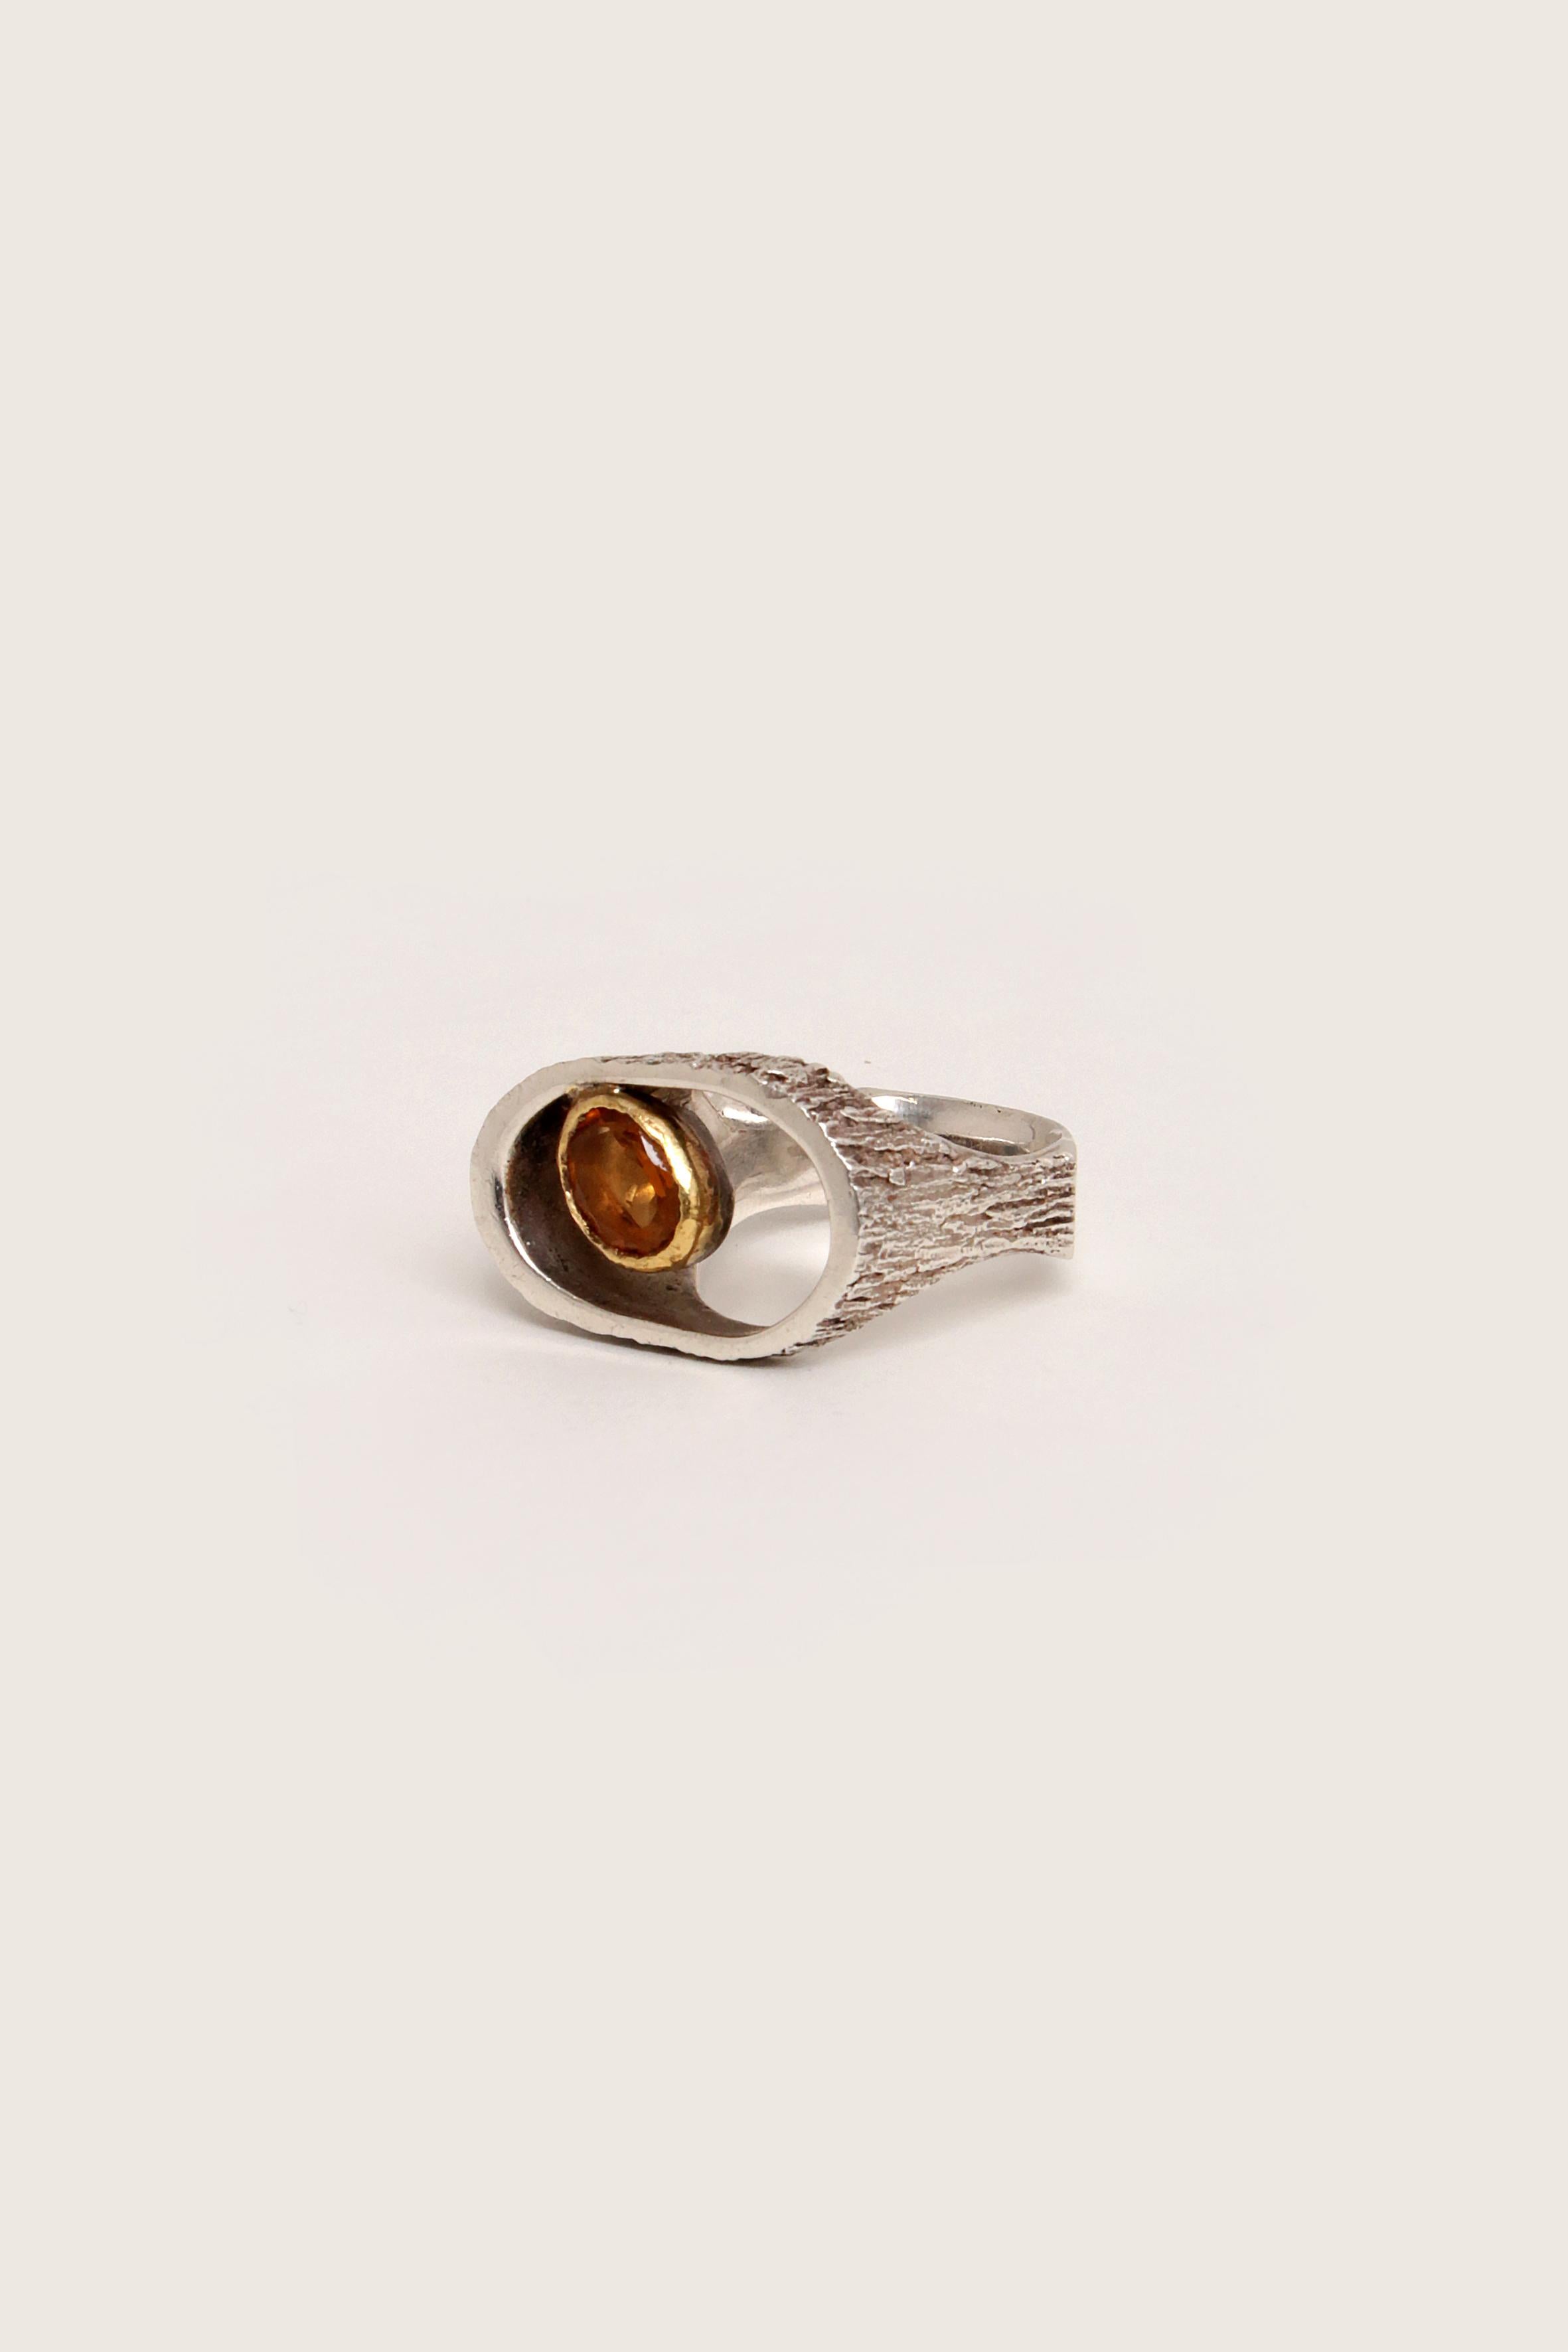 Silver ring hand forged Alexander van den Hoven, Netherlands

Alexander van den Hoven works in Arnhem and once designed this beautiful ring.

The ring is reminiscent of tree bark, which is where the idea originated.

With an edge of 14k gold and a